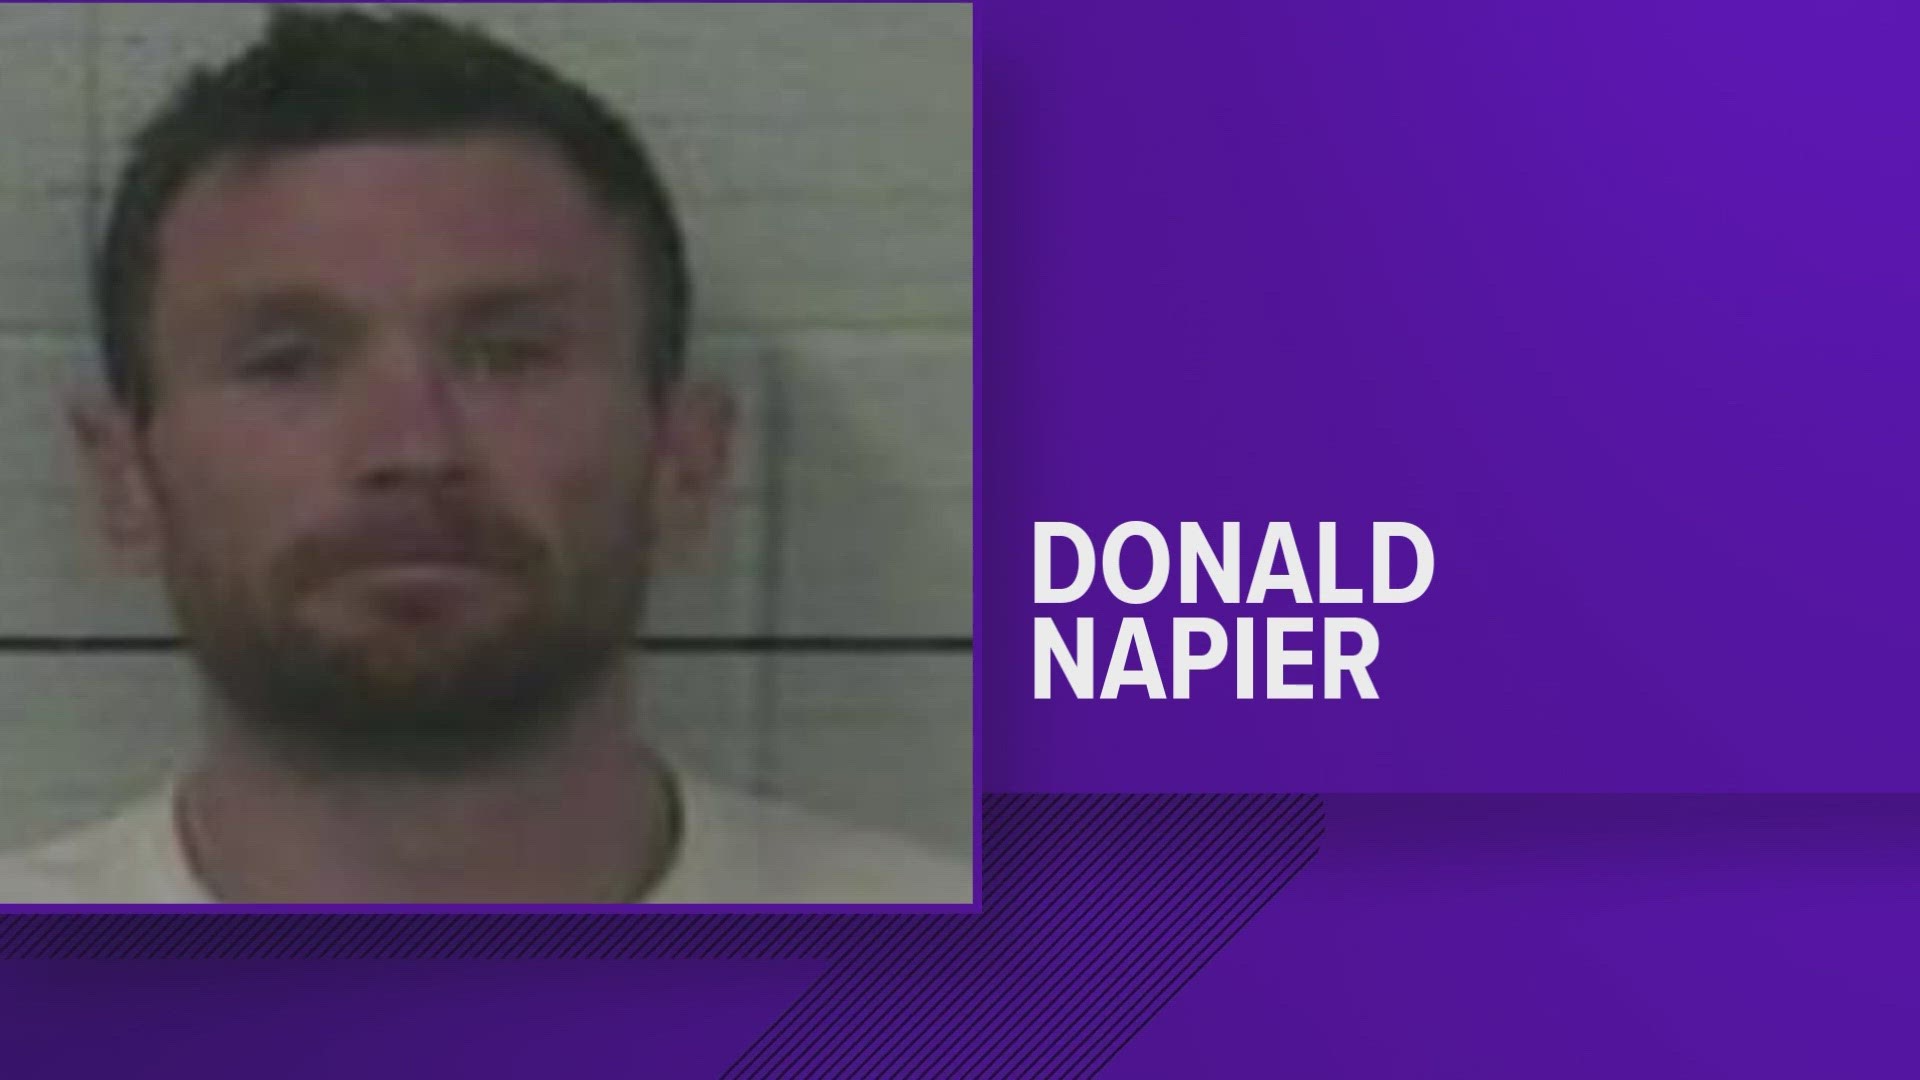 Donald Napier, 39, will be extradited back to Knox County, Kentucky, to face first-degree assault charges.